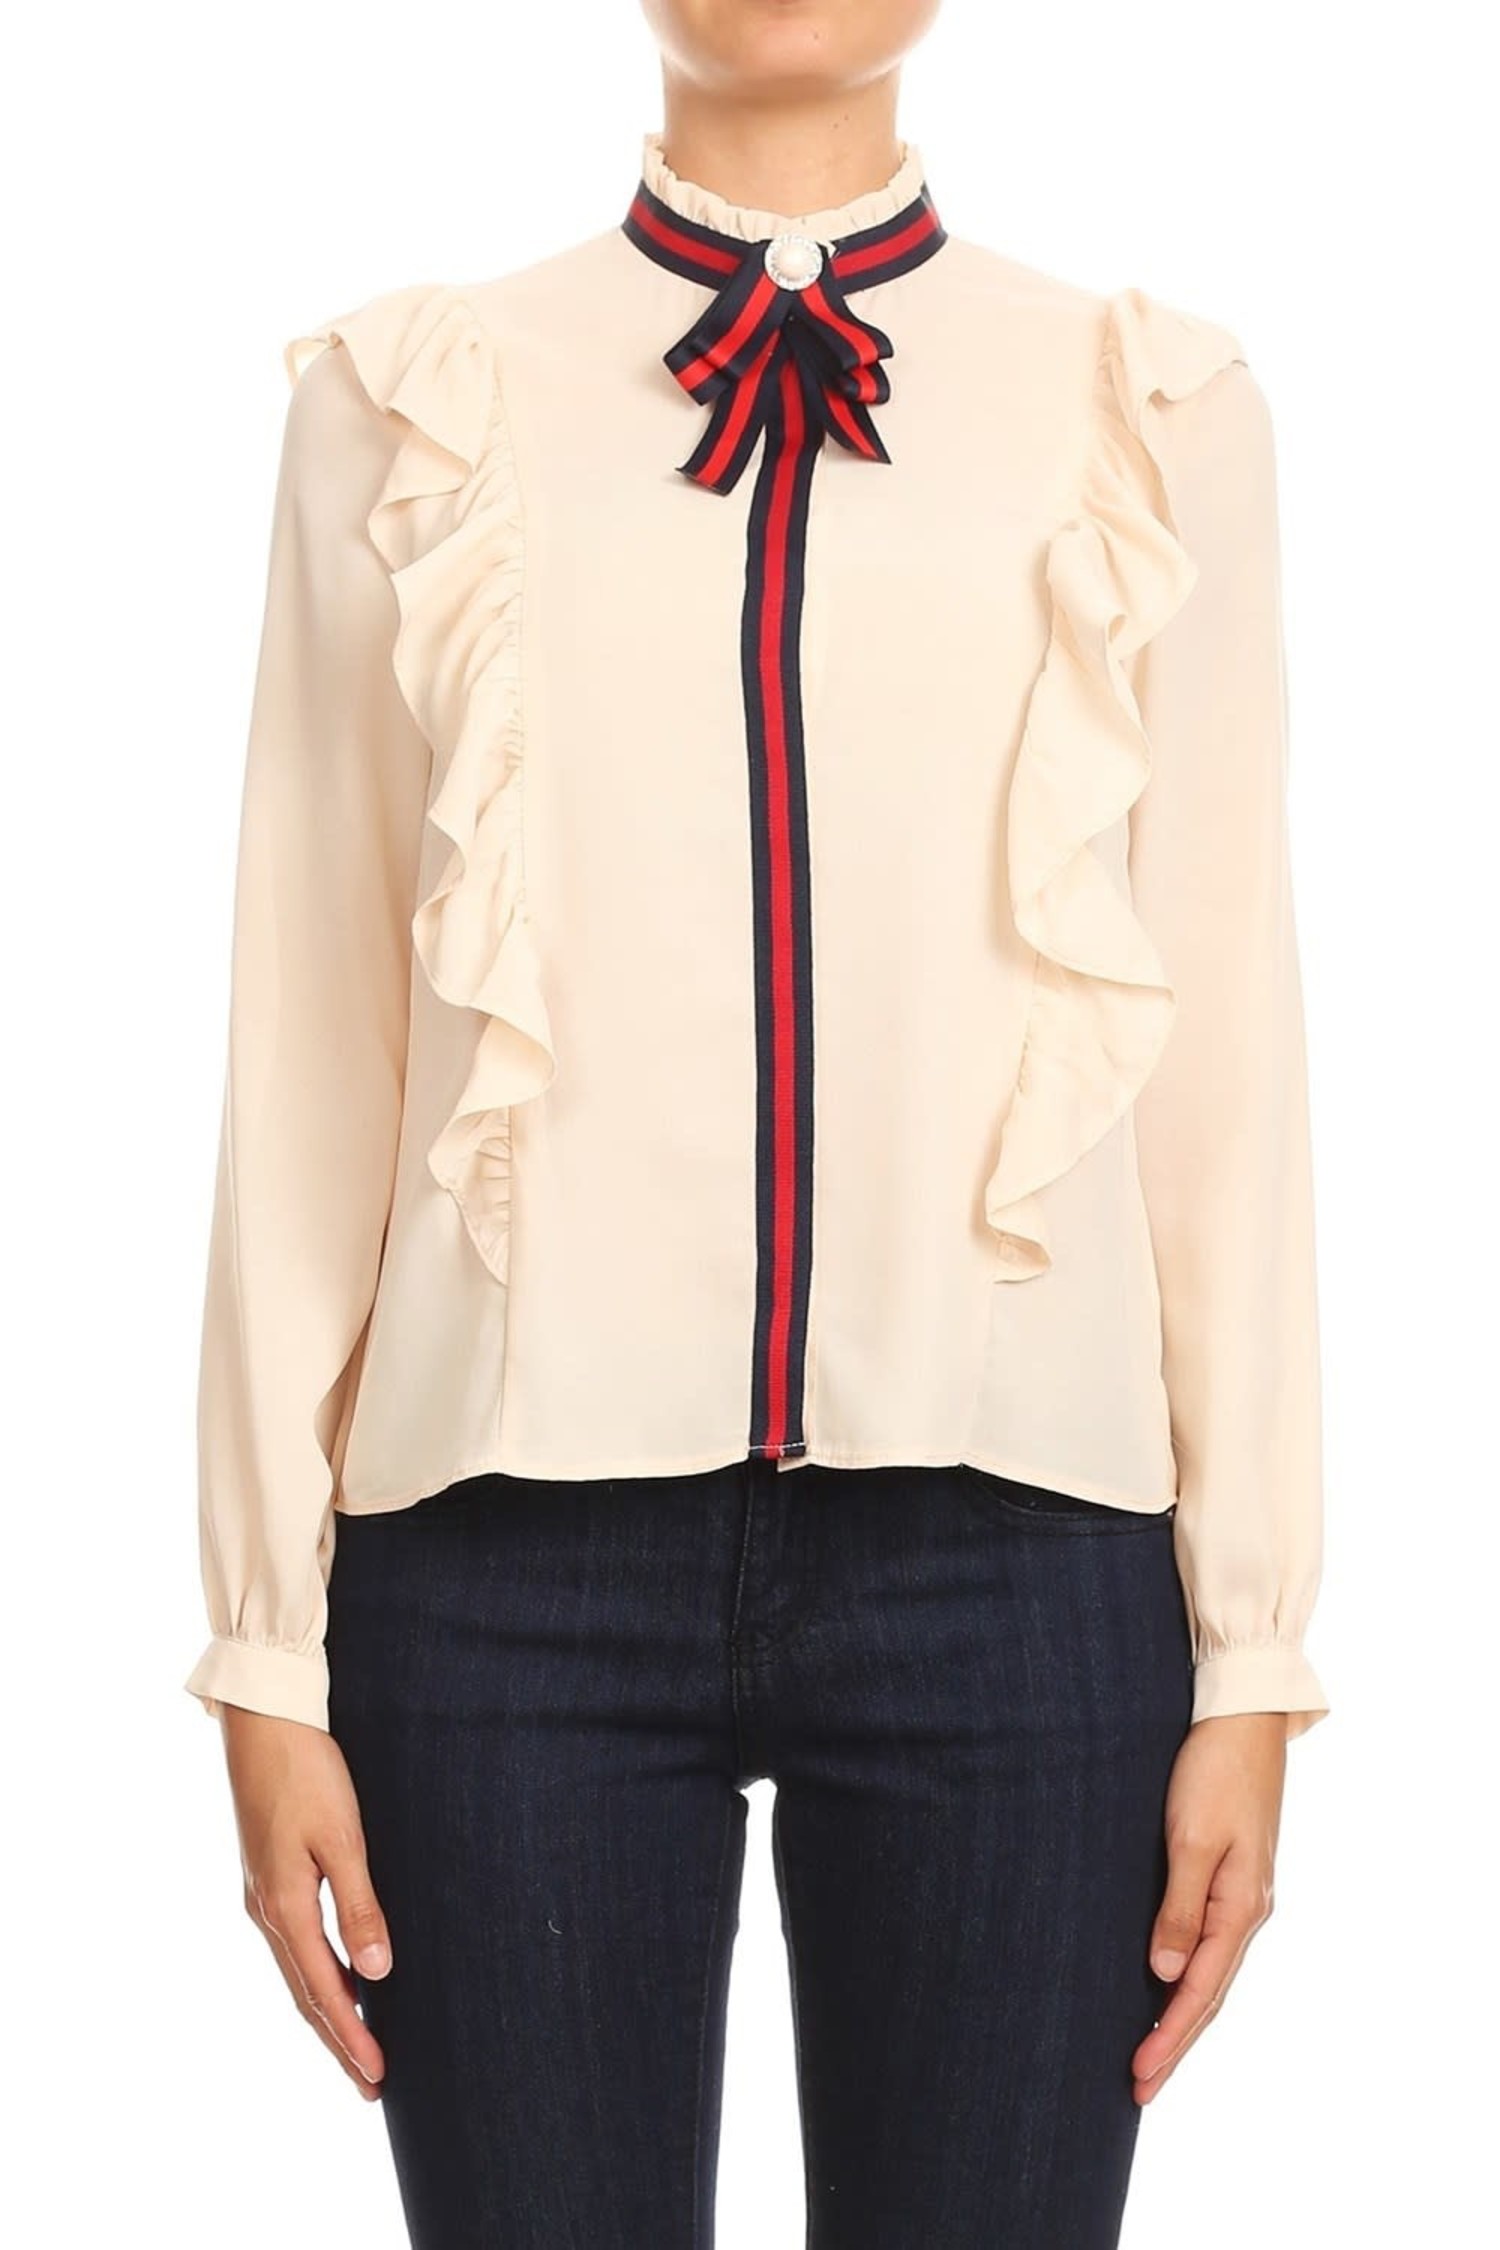 Gucci Inspired Blouse - Society Boutique